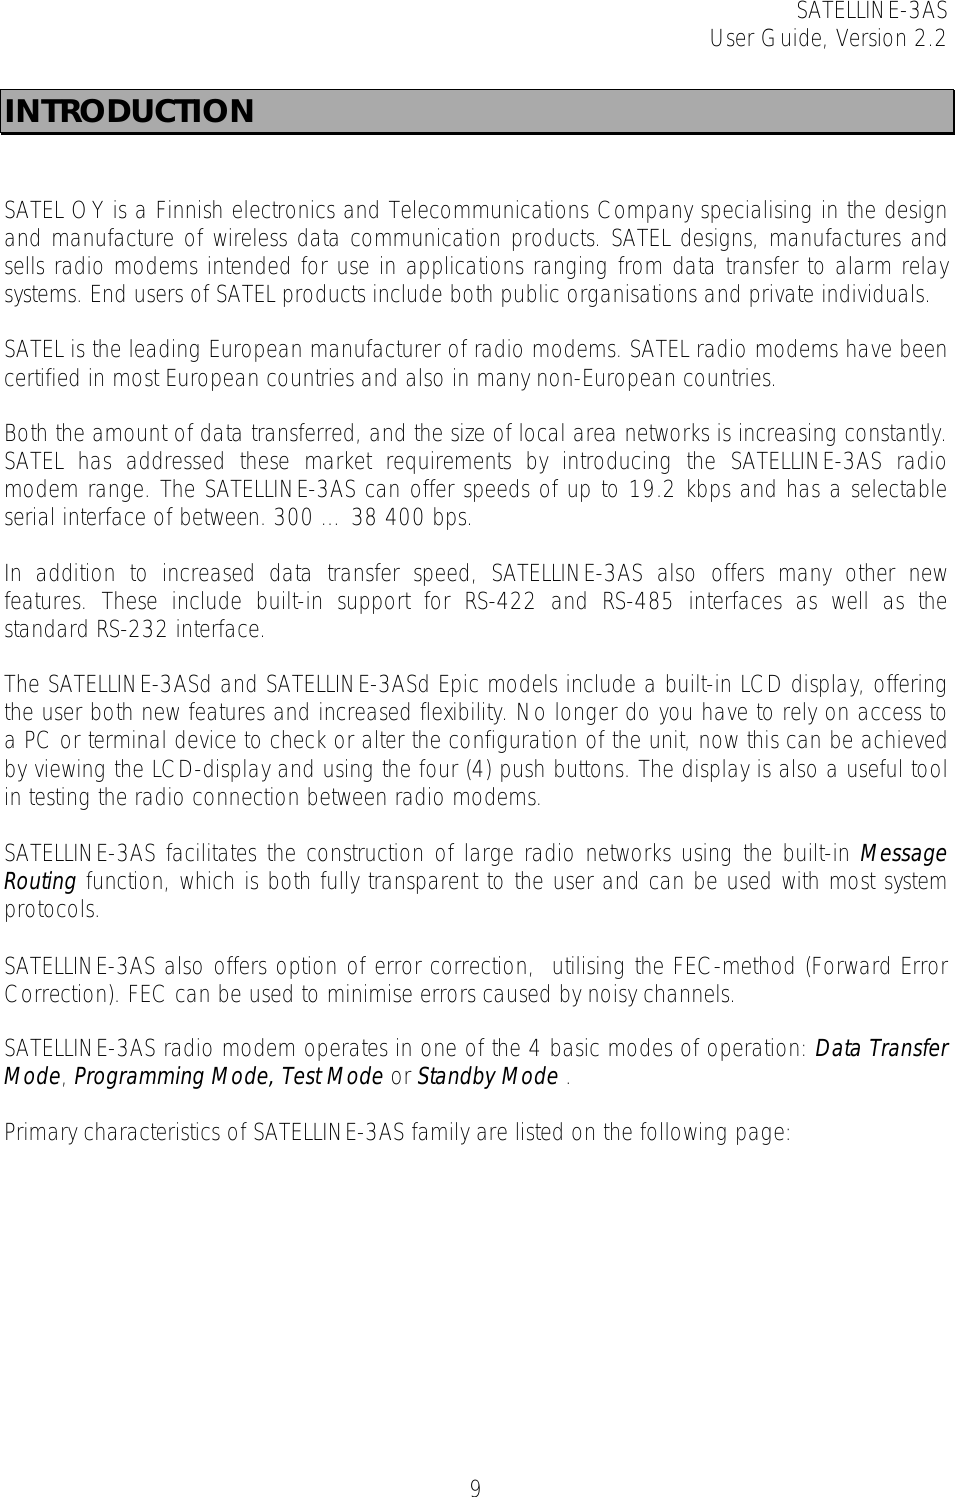 SATELLINE-3AS User Guide, Version 2.2   9INTRODUCTION   SATEL OY is a Finnish electronics and Telecommunications Company specialising in the design and manufacture of wireless data communication products. SATEL designs, manufactures and sells radio modems intended for use in applications ranging from data transfer to alarm relay systems. End users of SATEL products include both public organisations and private individuals.   SATEL is the leading European manufacturer of radio modems. SATEL radio modems have been certified in most European countries and also in many non-European countries.   Both the amount of data transferred, and the size of local area networks is increasing constantly. SATEL has addressed these market requirements by introducing the SATELLINE-3AS radio modem range. The SATELLINE-3AS can offer speeds of up to 19.2 kbps and has a selectable serial interface of between. 300 … 38 400 bps.   In addition to increased data transfer speed, SATELLINE-3AS also offers many other new features. These include built-in support for RS-422 and RS-485 interfaces as well as the standard RS-232 interface.  The SATELLINE-3ASd and SATELLINE-3ASd Epic models include a built-in LCD display, offering the user both new features and increased flexibility. No longer do you have to rely on access to a PC or terminal device to check or alter the configuration of the unit, now this can be achieved by viewing the LCD-display and using the four (4) push buttons. The display is also a useful tool in testing the radio connection between radio modems.   SATELLINE-3AS facilitates the construction of large radio networks using the built-in Message Routing function, which is both fully transparent to the user and can be used with most system protocols.   SATELLINE-3AS also offers option of error correction,  utilising the FEC-method (Forward Error Correction). FEC can be used to minimise errors caused by noisy channels.   SATELLINE-3AS radio modem operates in one of the 4 basic modes of operation: Data Transfer Mode, Programming Mode, Test Mode or Standby Mode .   Primary characteristics of SATELLINE-3AS family are listed on the following page:  